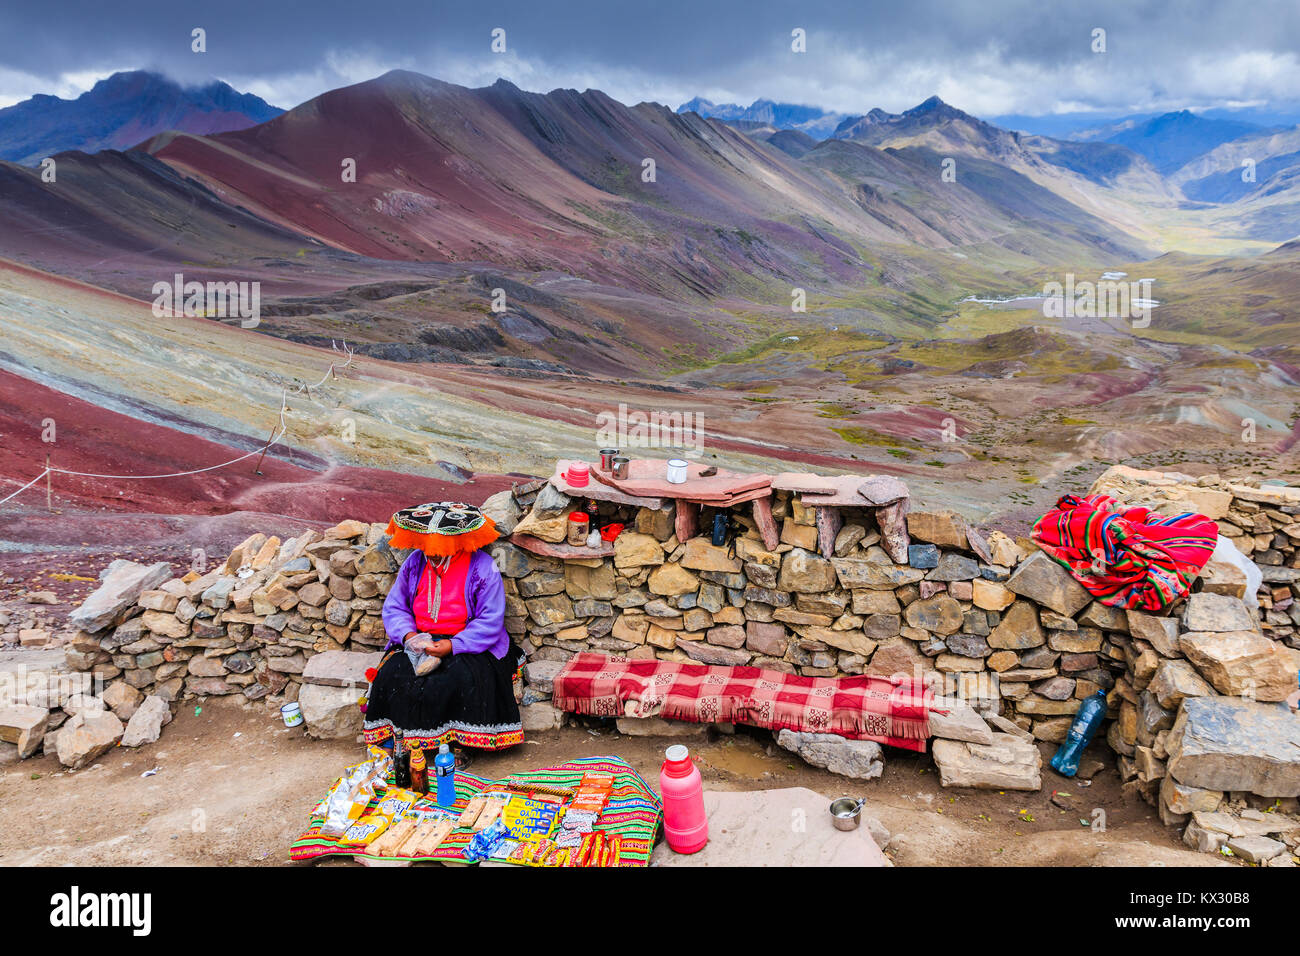 RAINBOW MOUNTAINES PERU - APRIL 25, 2017: Native peruvian woman wearing traditional clothes and selling souvenirs for tourists. Stock Photo